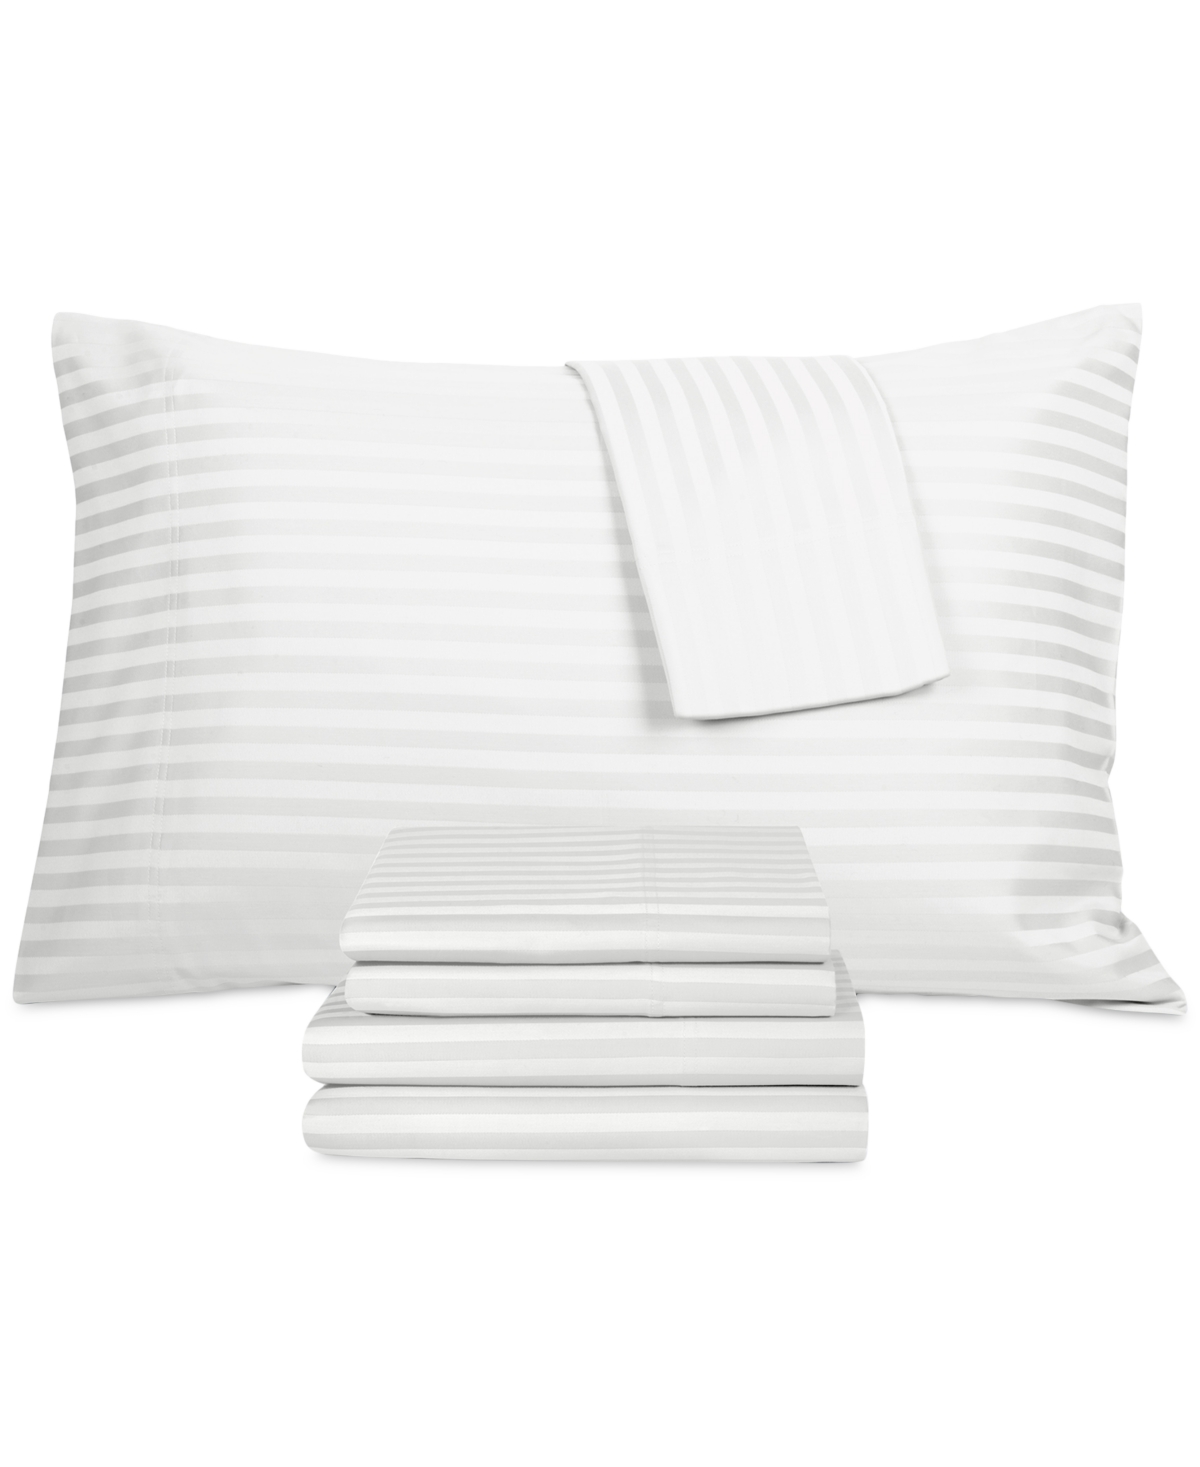 Fairfield Square Collection Brookline Woven Stripe 1400-thread Count 6-pc. Sheet Set, Queen In White